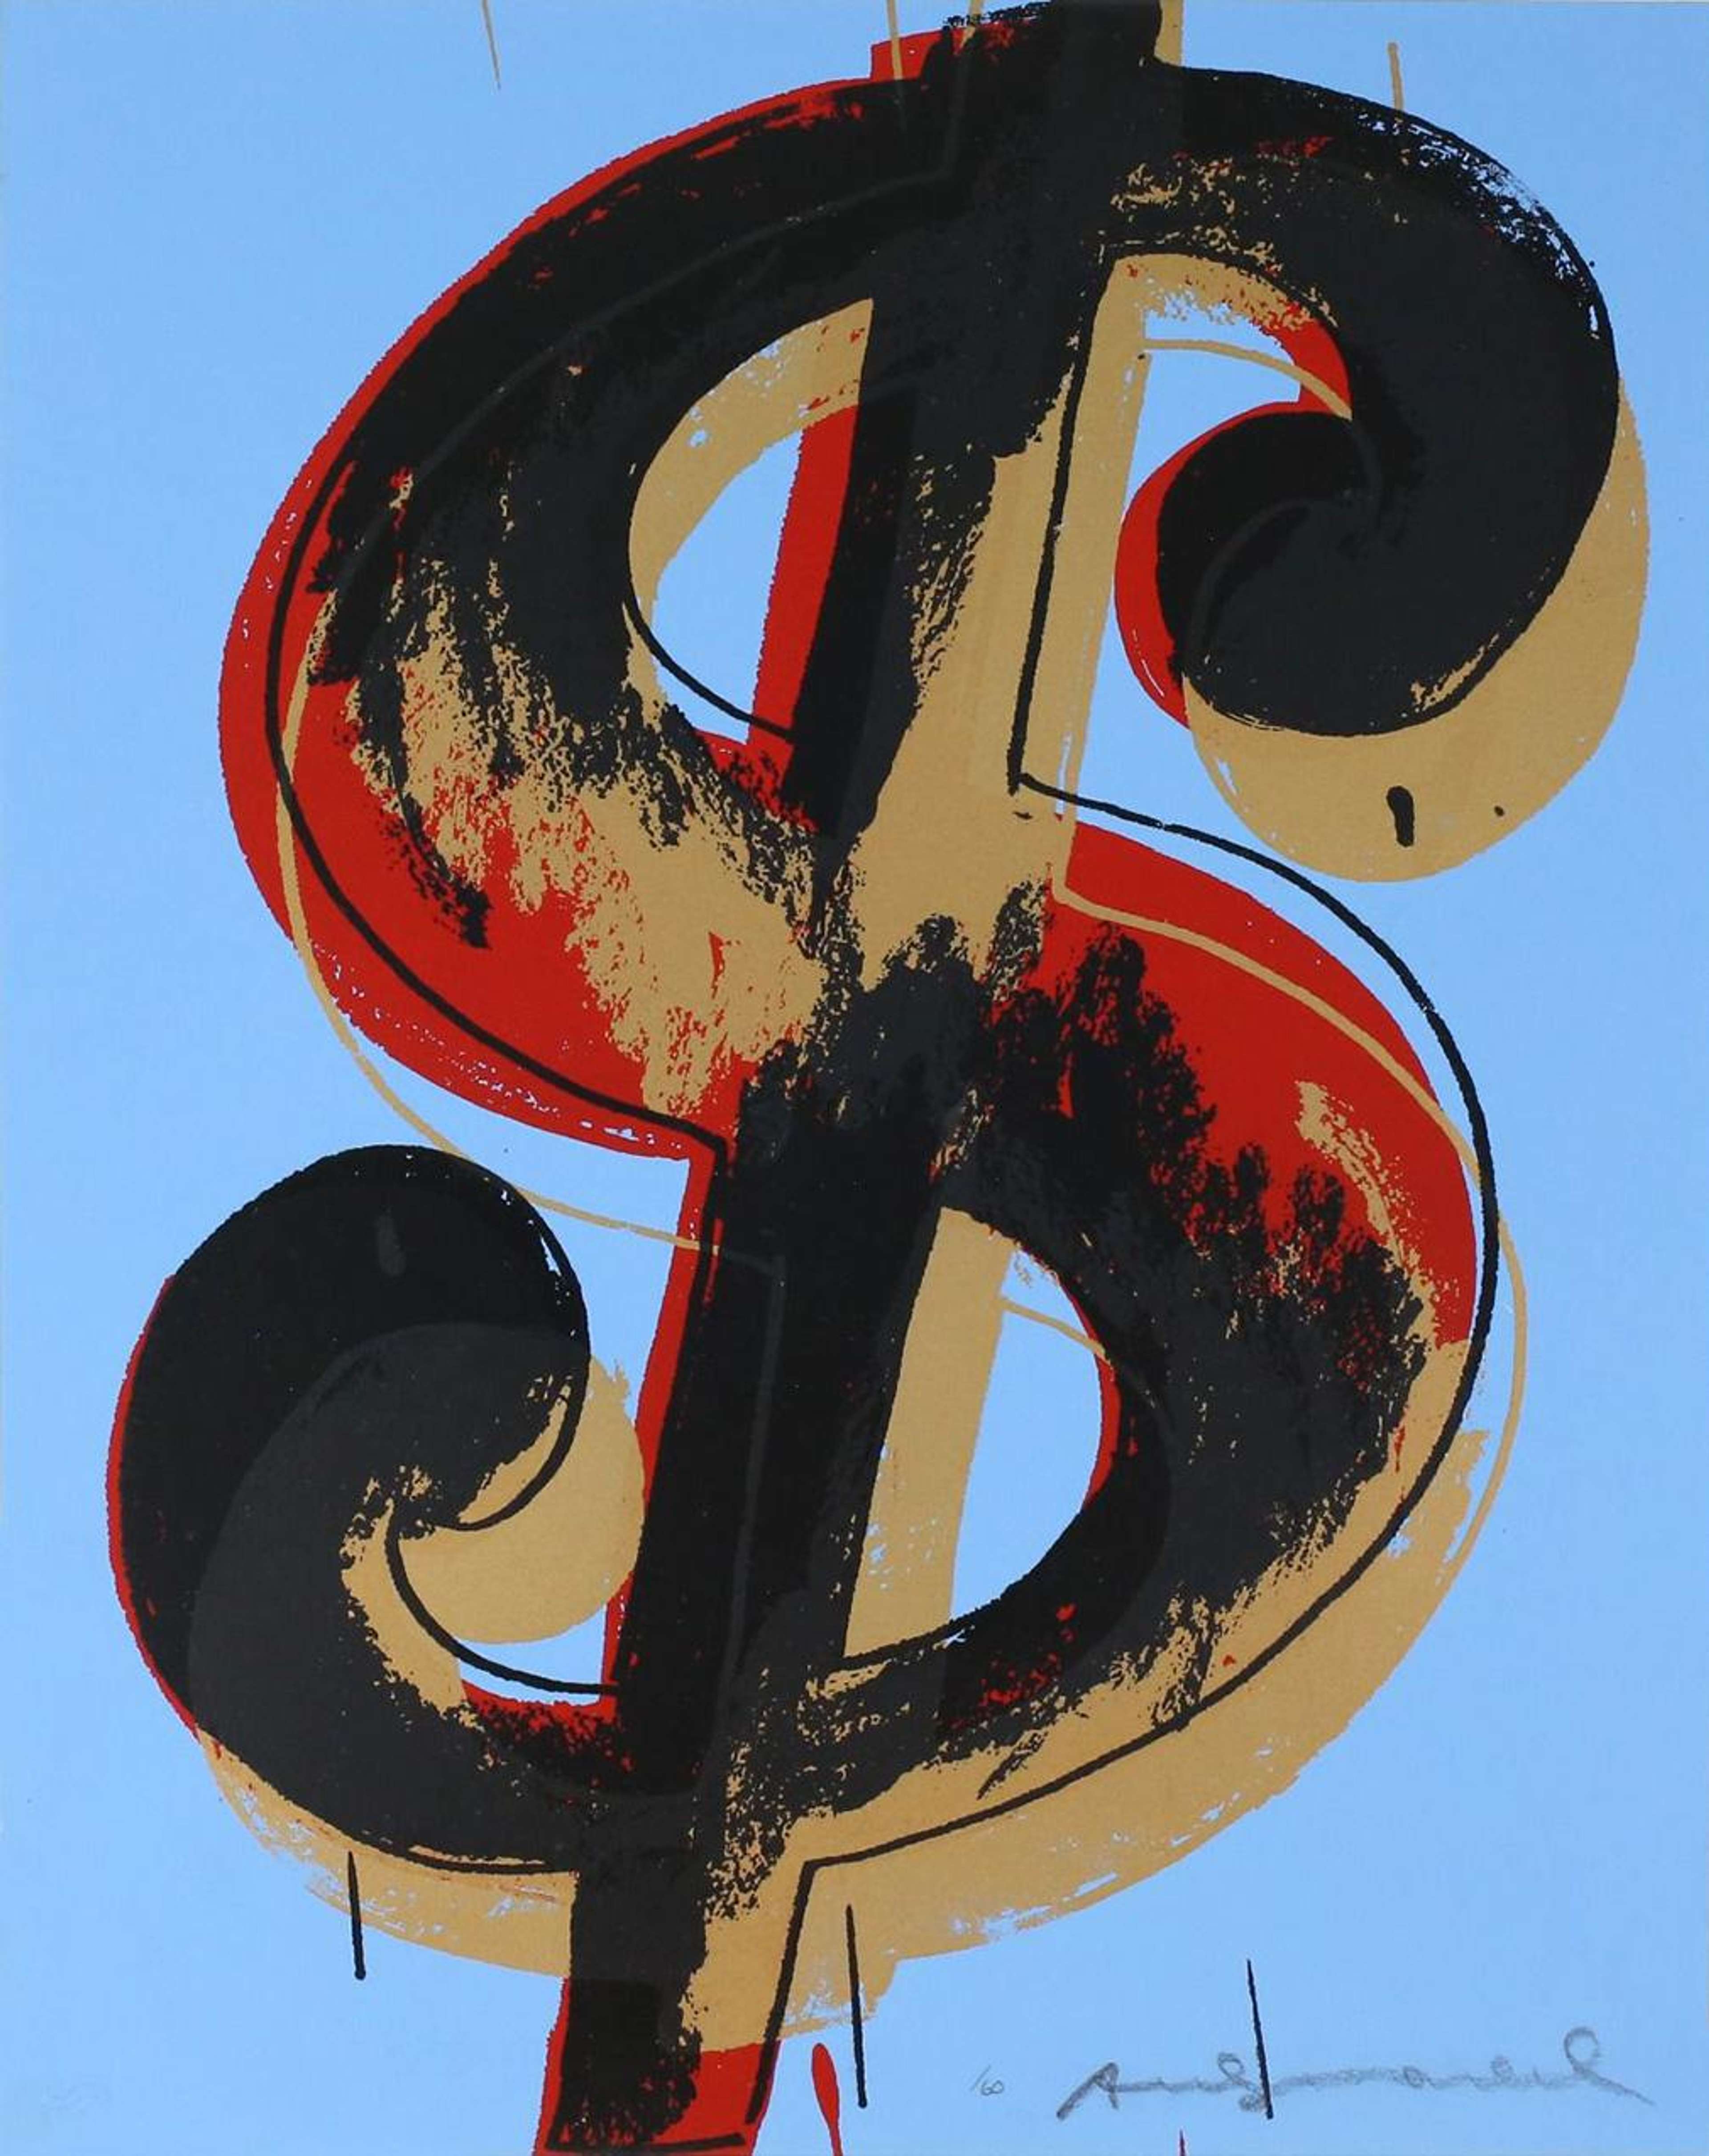 A screenprint by Andy Warhol depicting a graphic Dollar Sign in black, red, and ochre, set against a light blue background with the artist's signature in the bottom right corner.